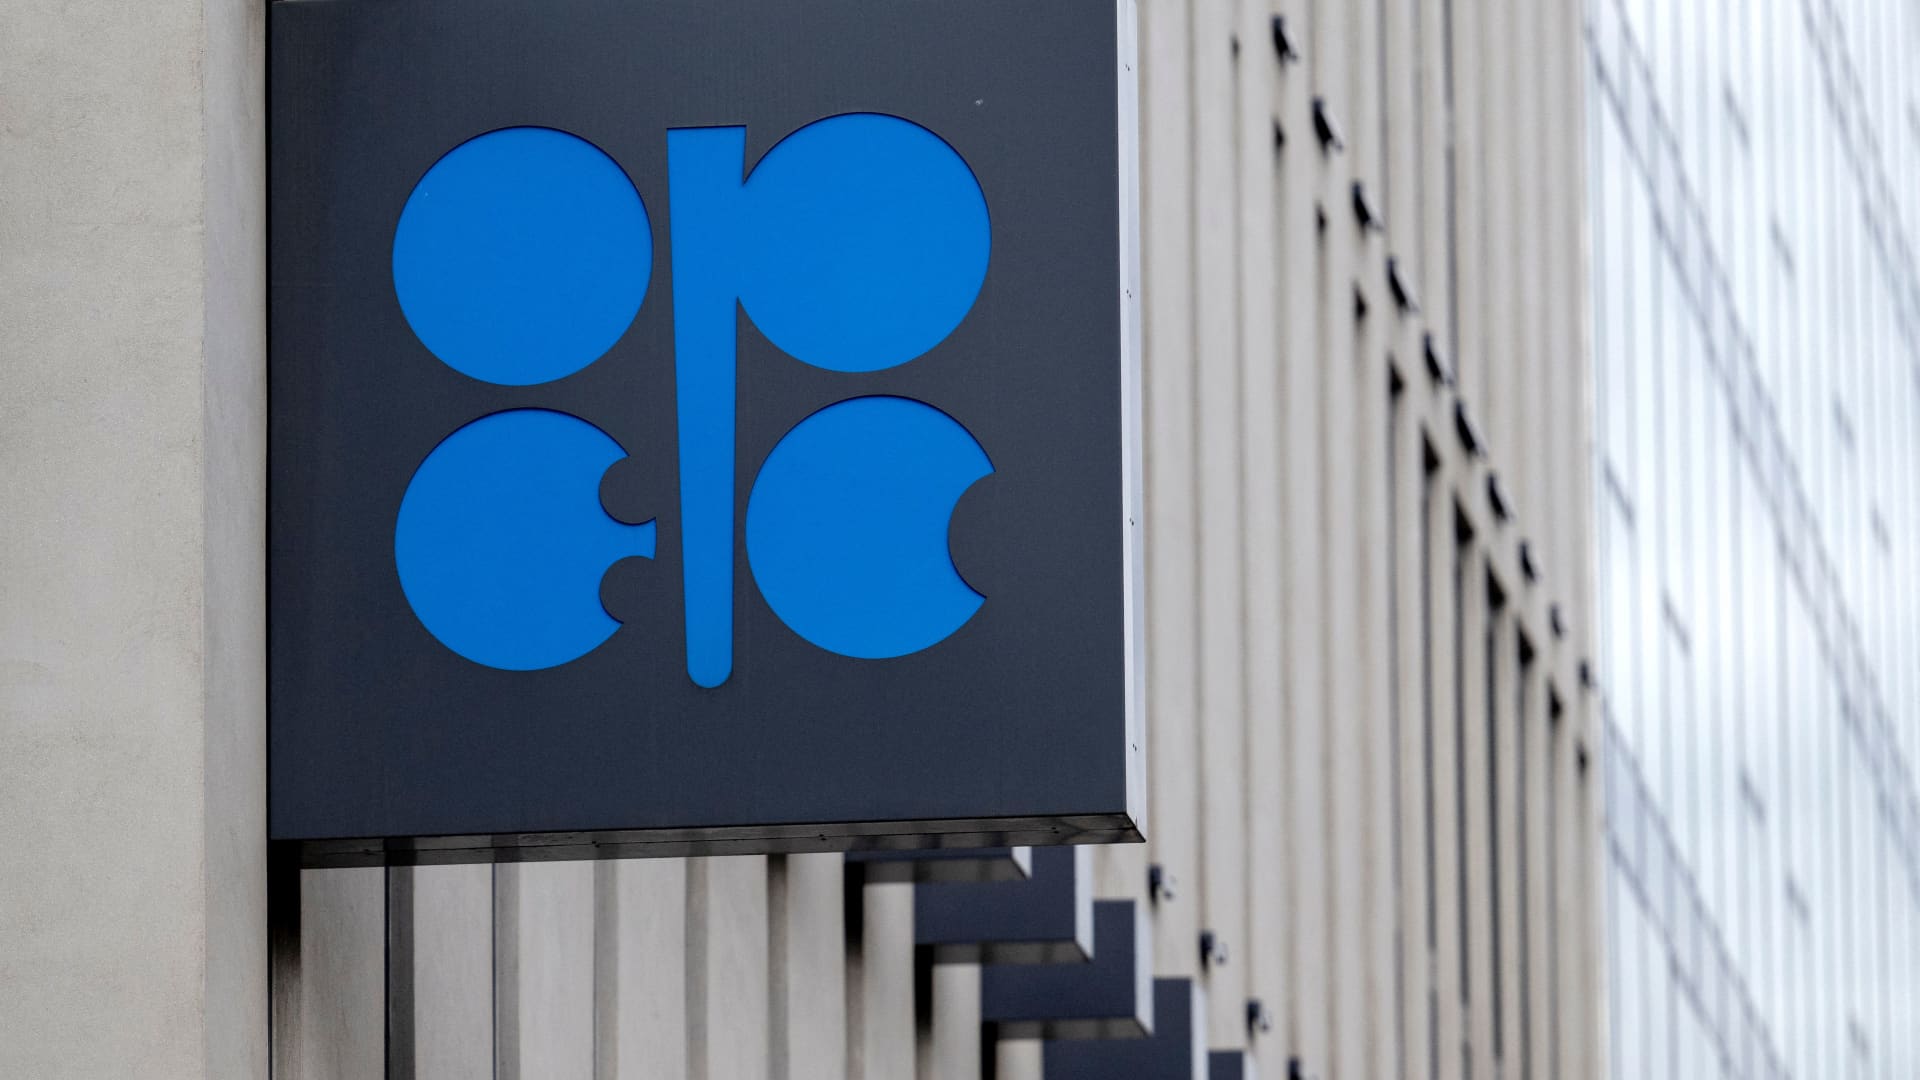 Angola’s OPEC exit highlights group tensions – but is unlikely to rattle the market